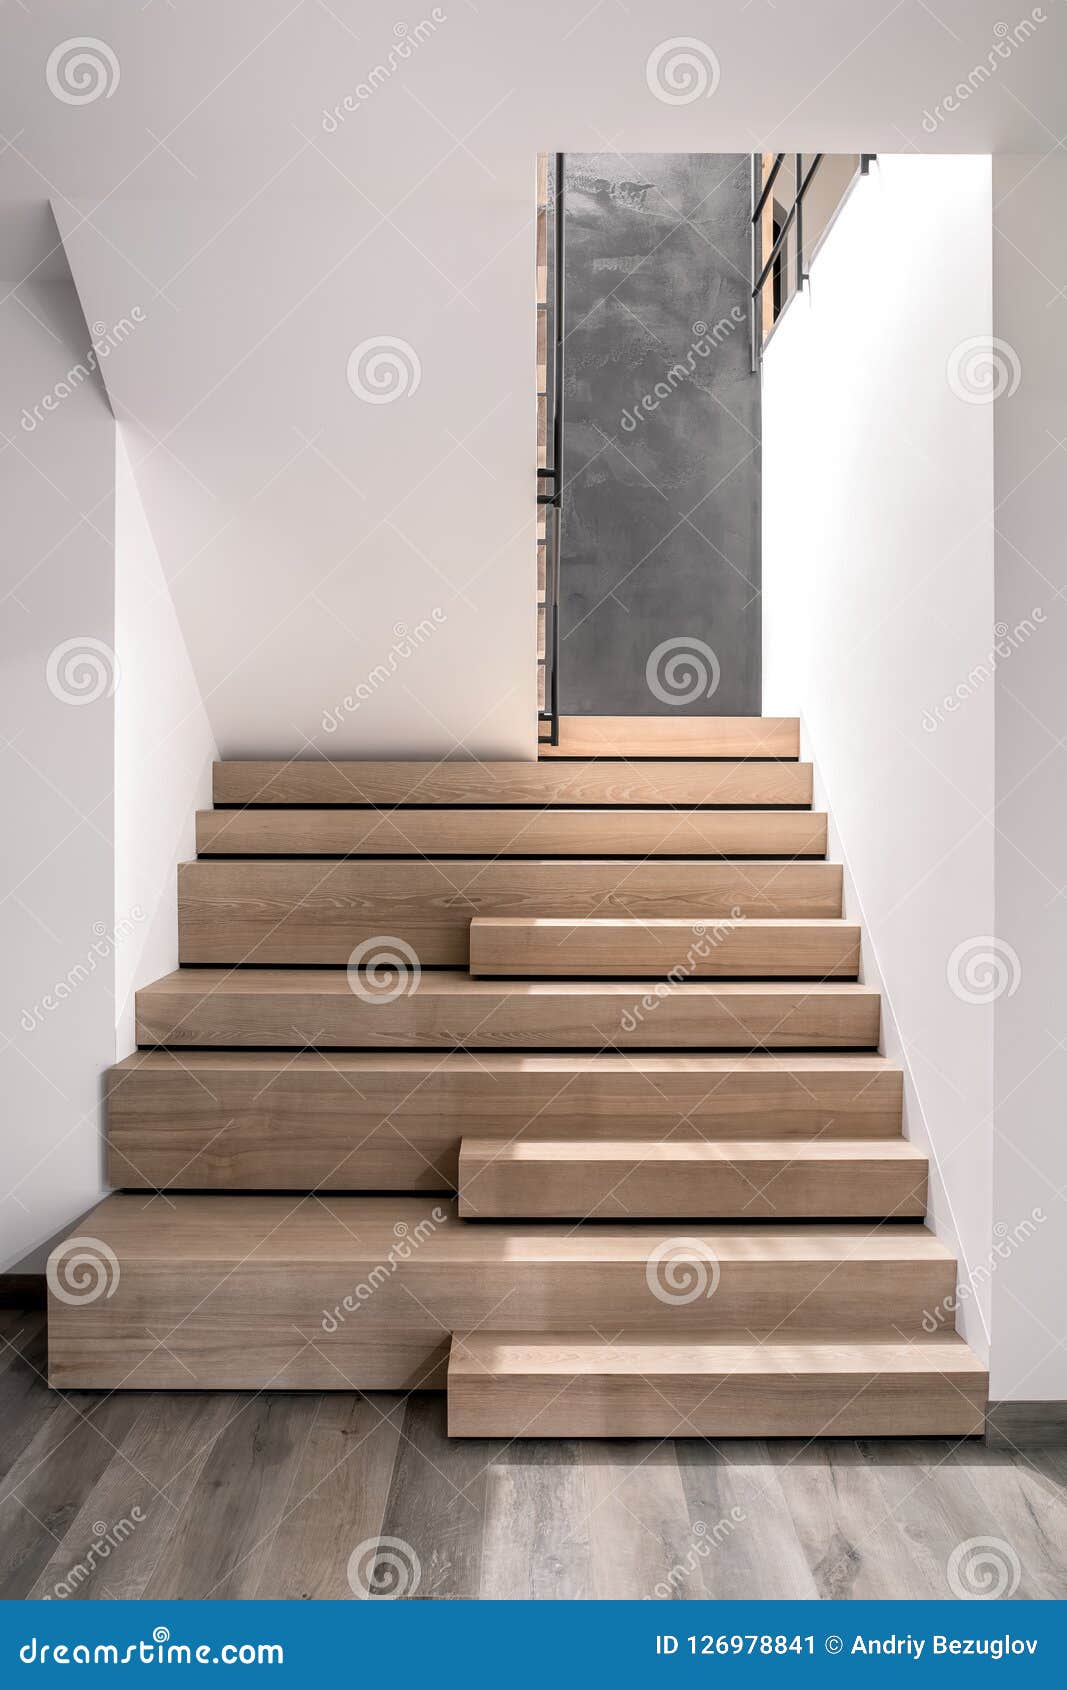 Stylish Interior In Modern Style With Wooden Stair Stock